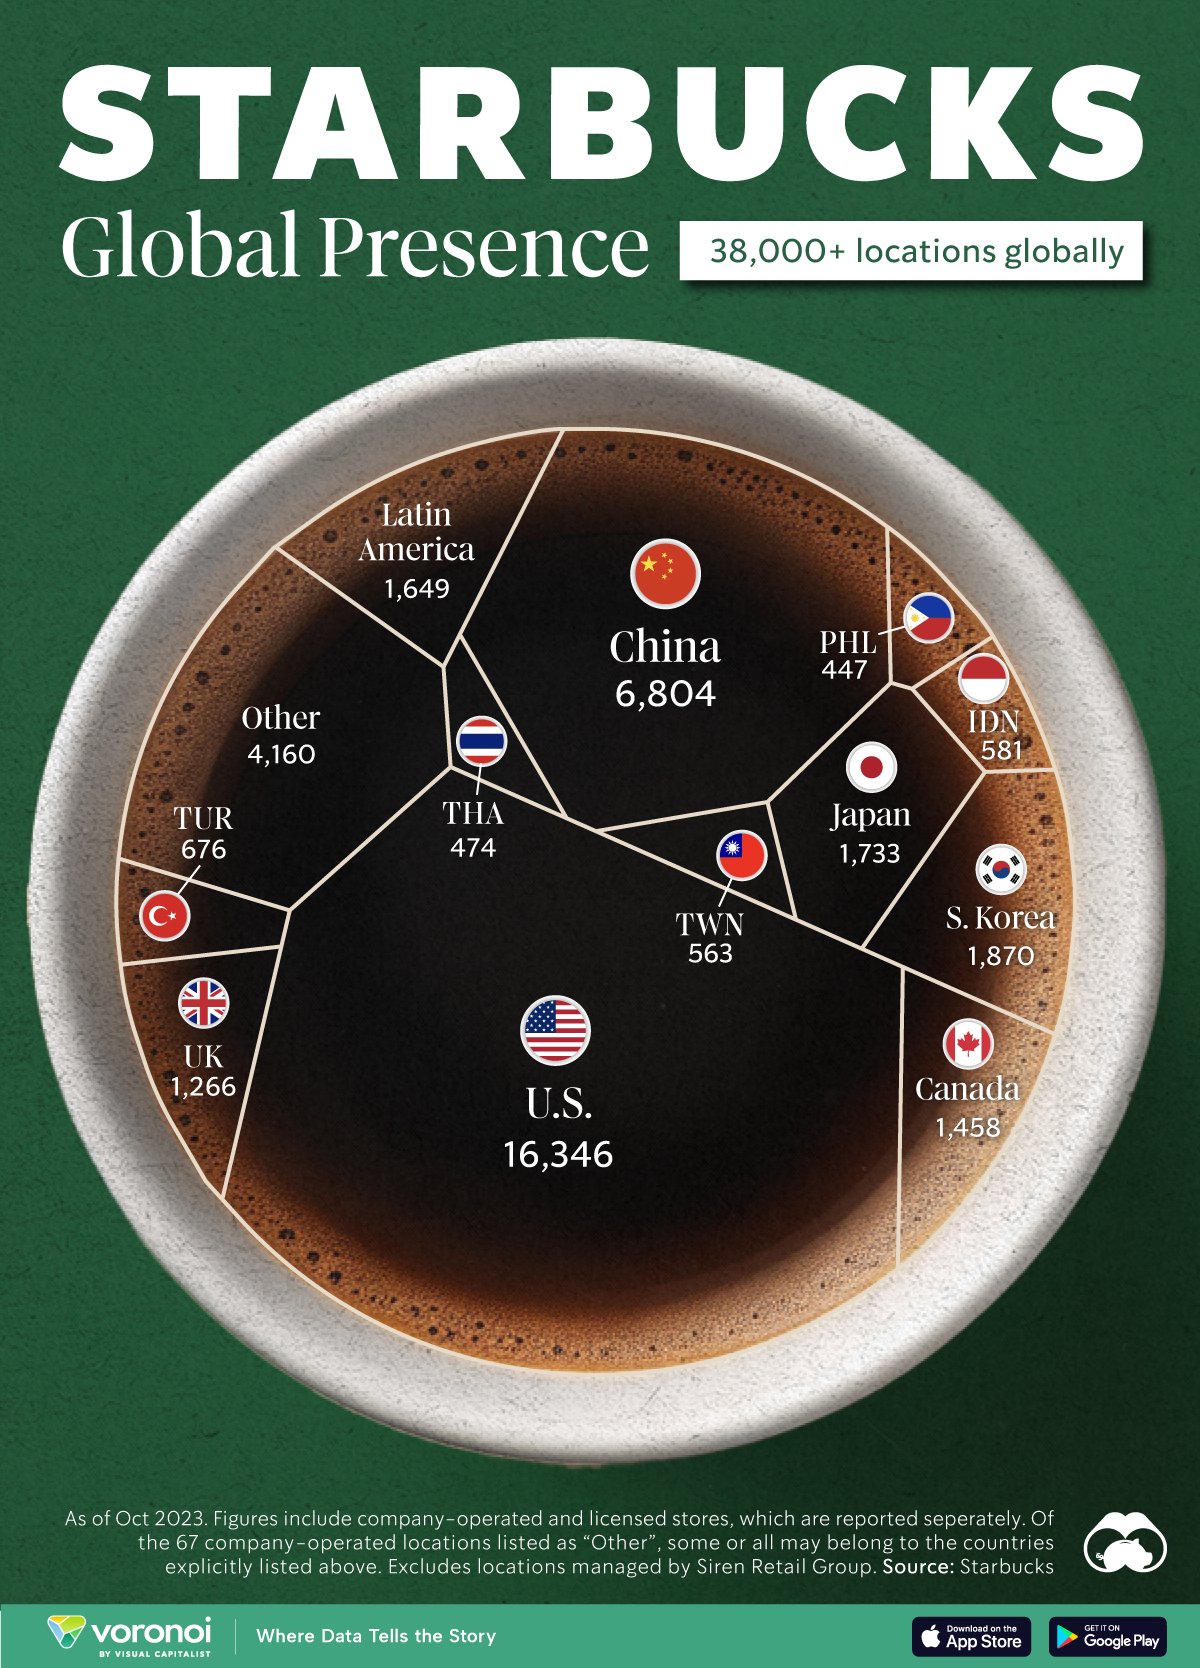 A chart showing the breakup of which countries have the most starbucks stores.